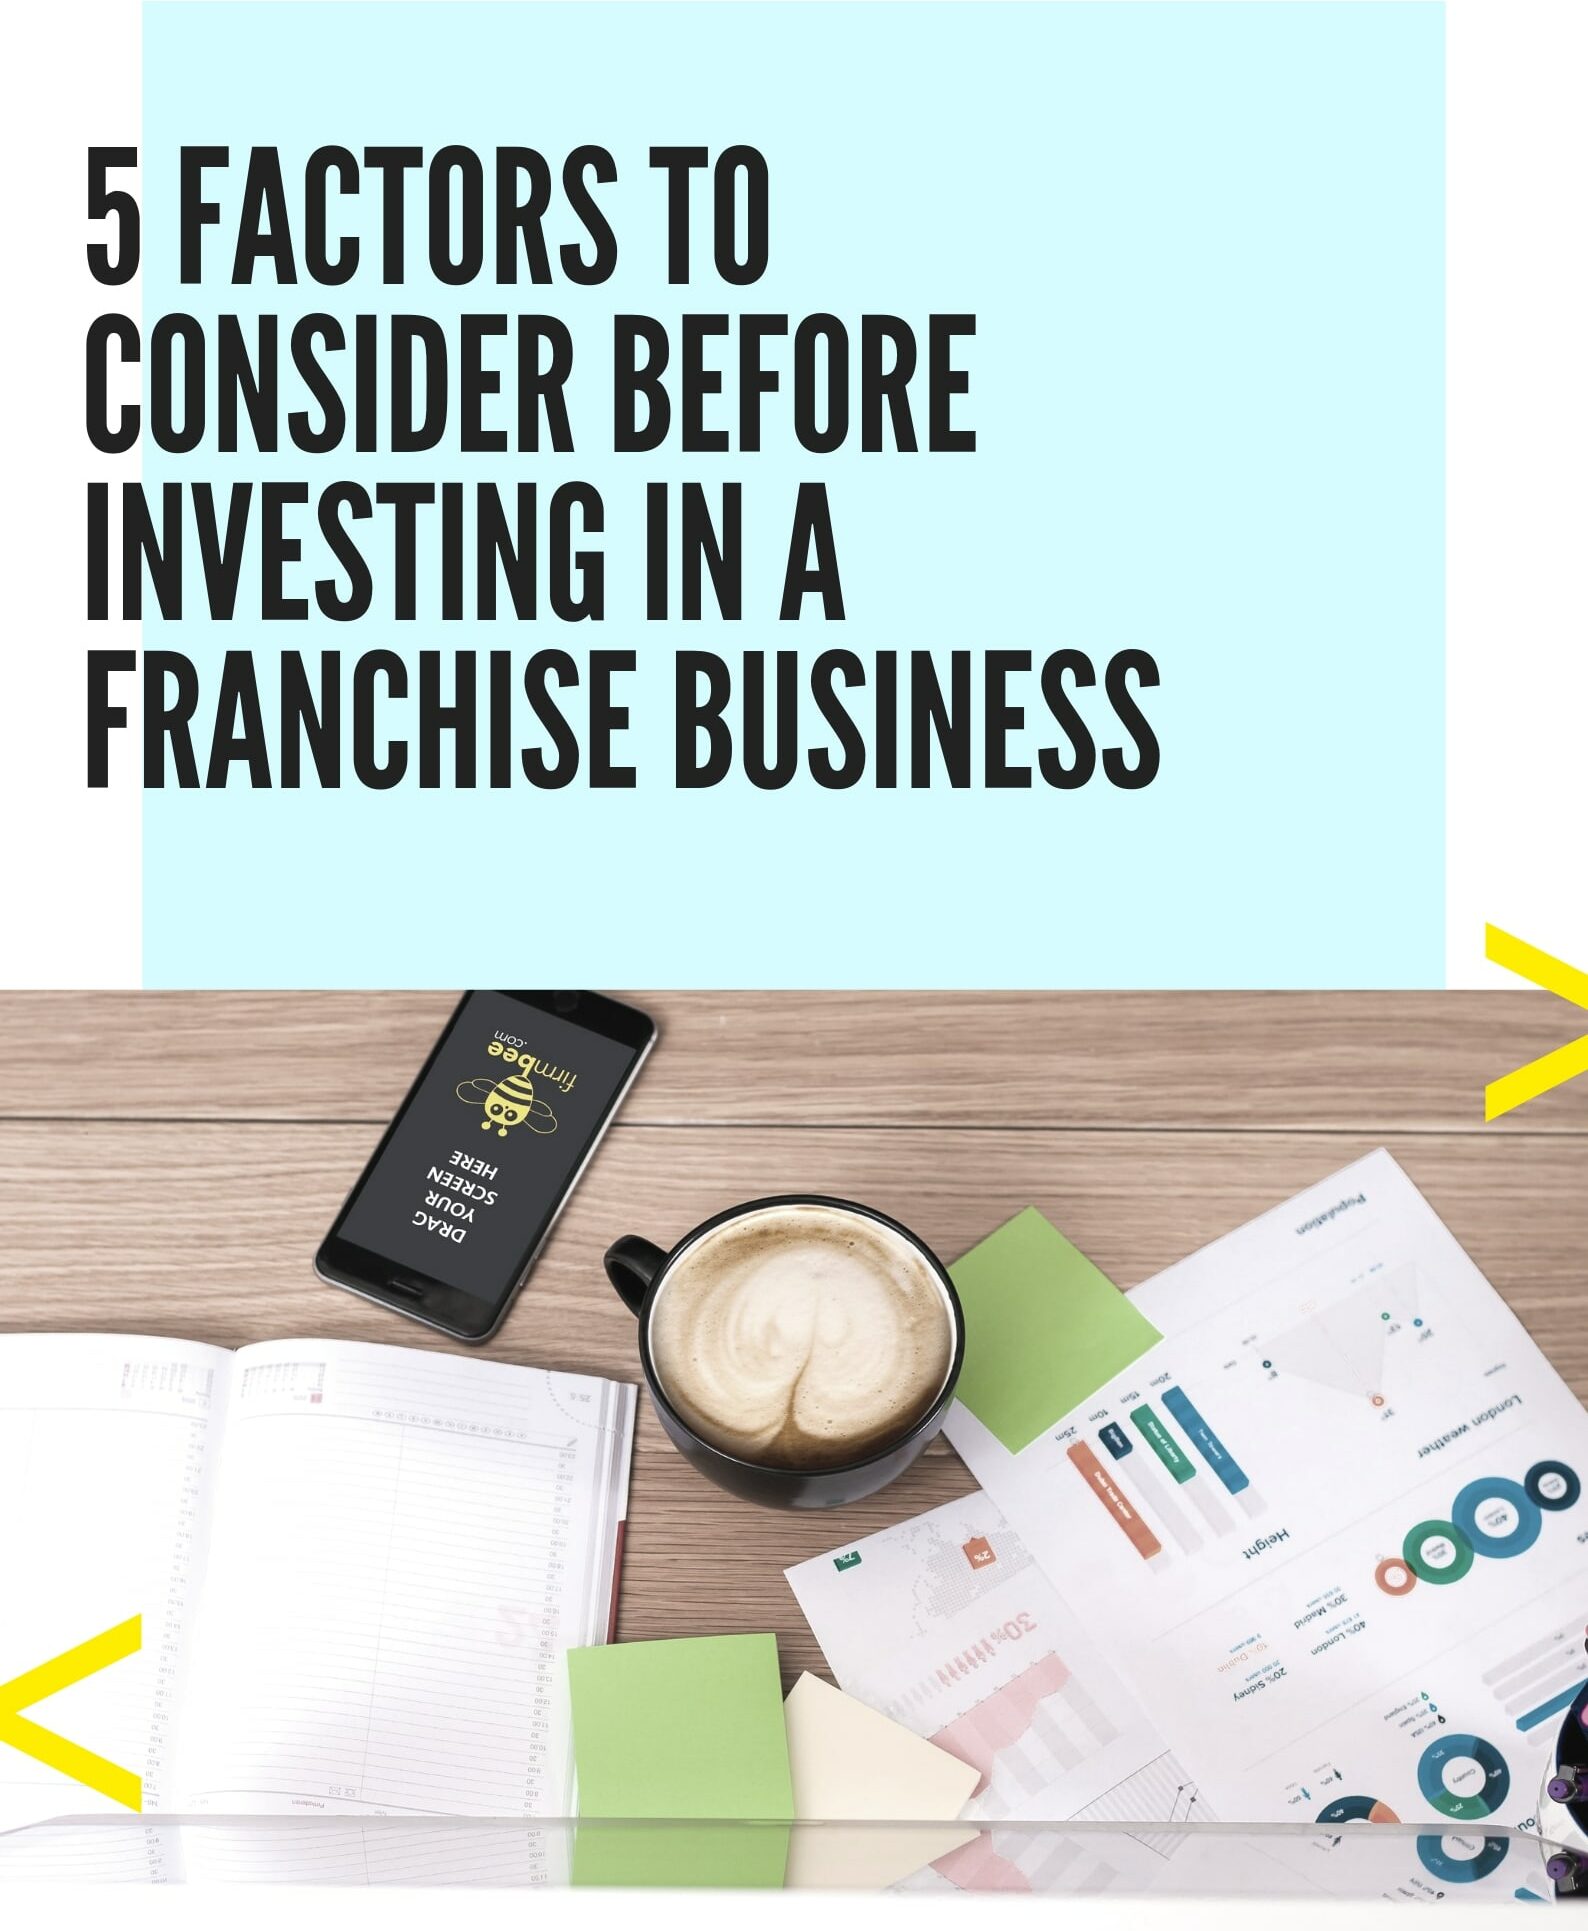 5 FACTORS TO CONSIDER BEFORE INVESTING IN A FRANCHISE BUSINESS